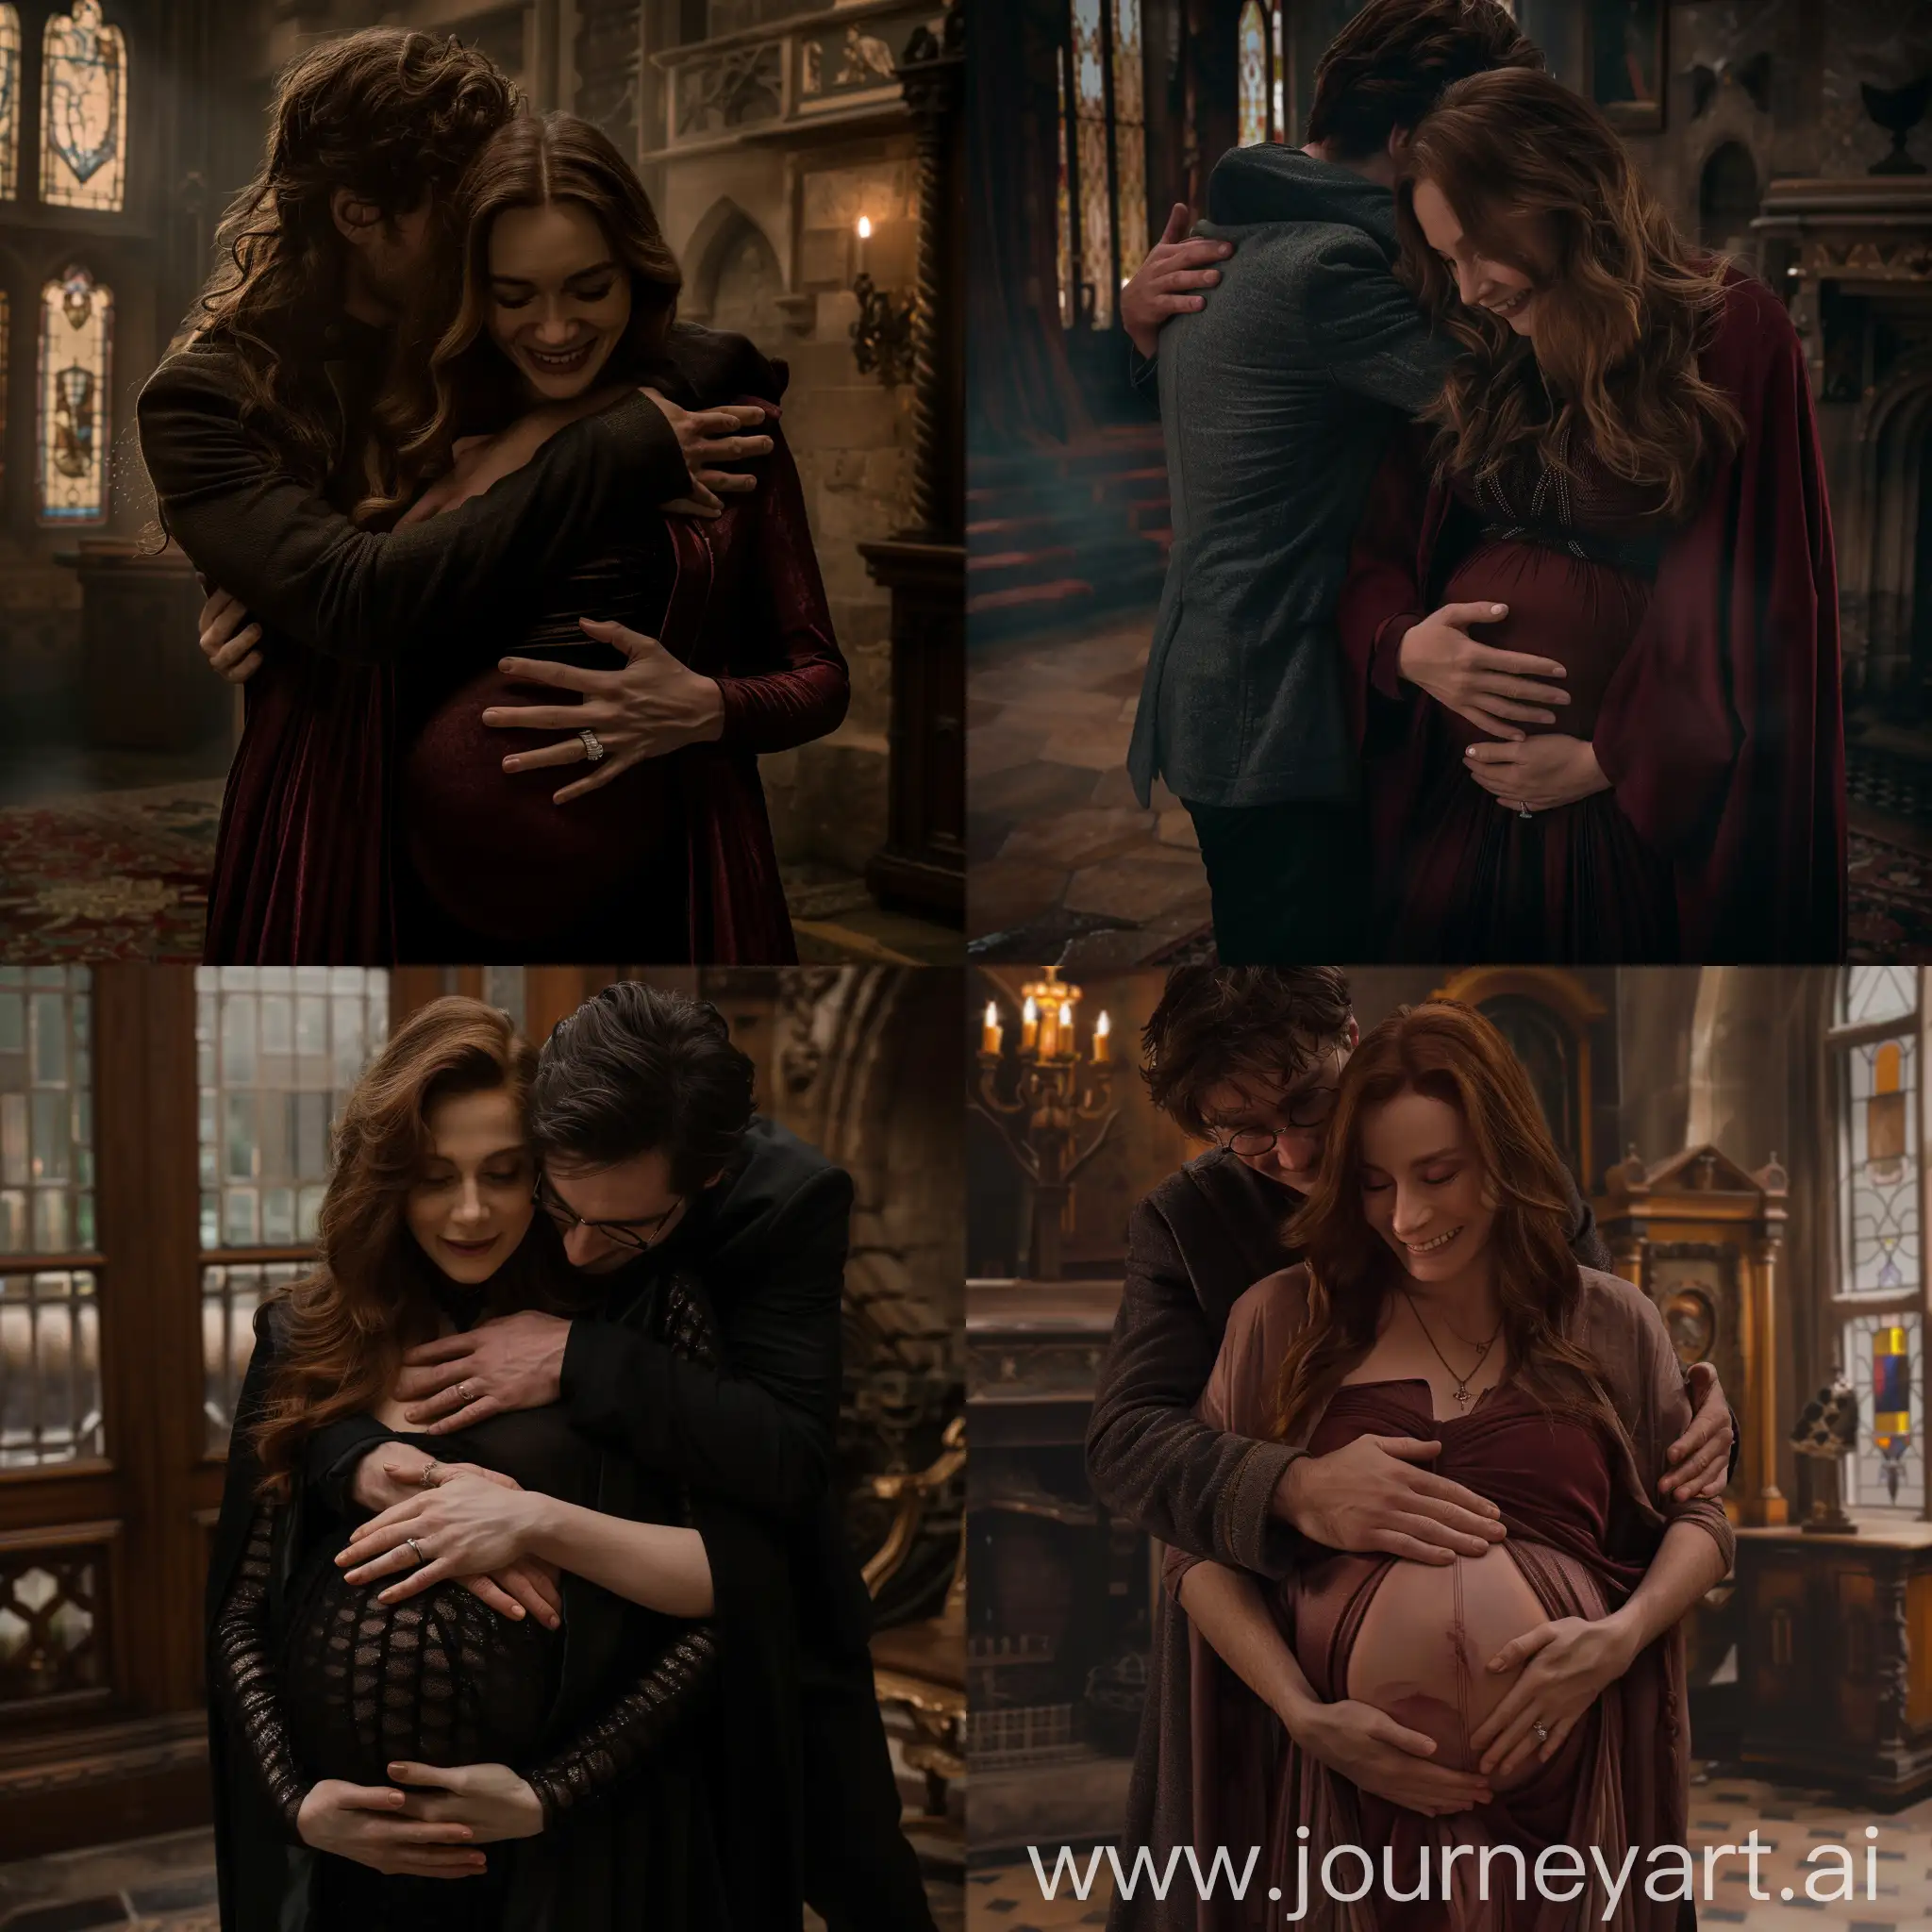 Wanda Maximoff is pregnant, hands holding her belly, extremely happy expression, Harry Potter hugging her from behind, the scene takes place inside a mansion, extremely realistic, 8k